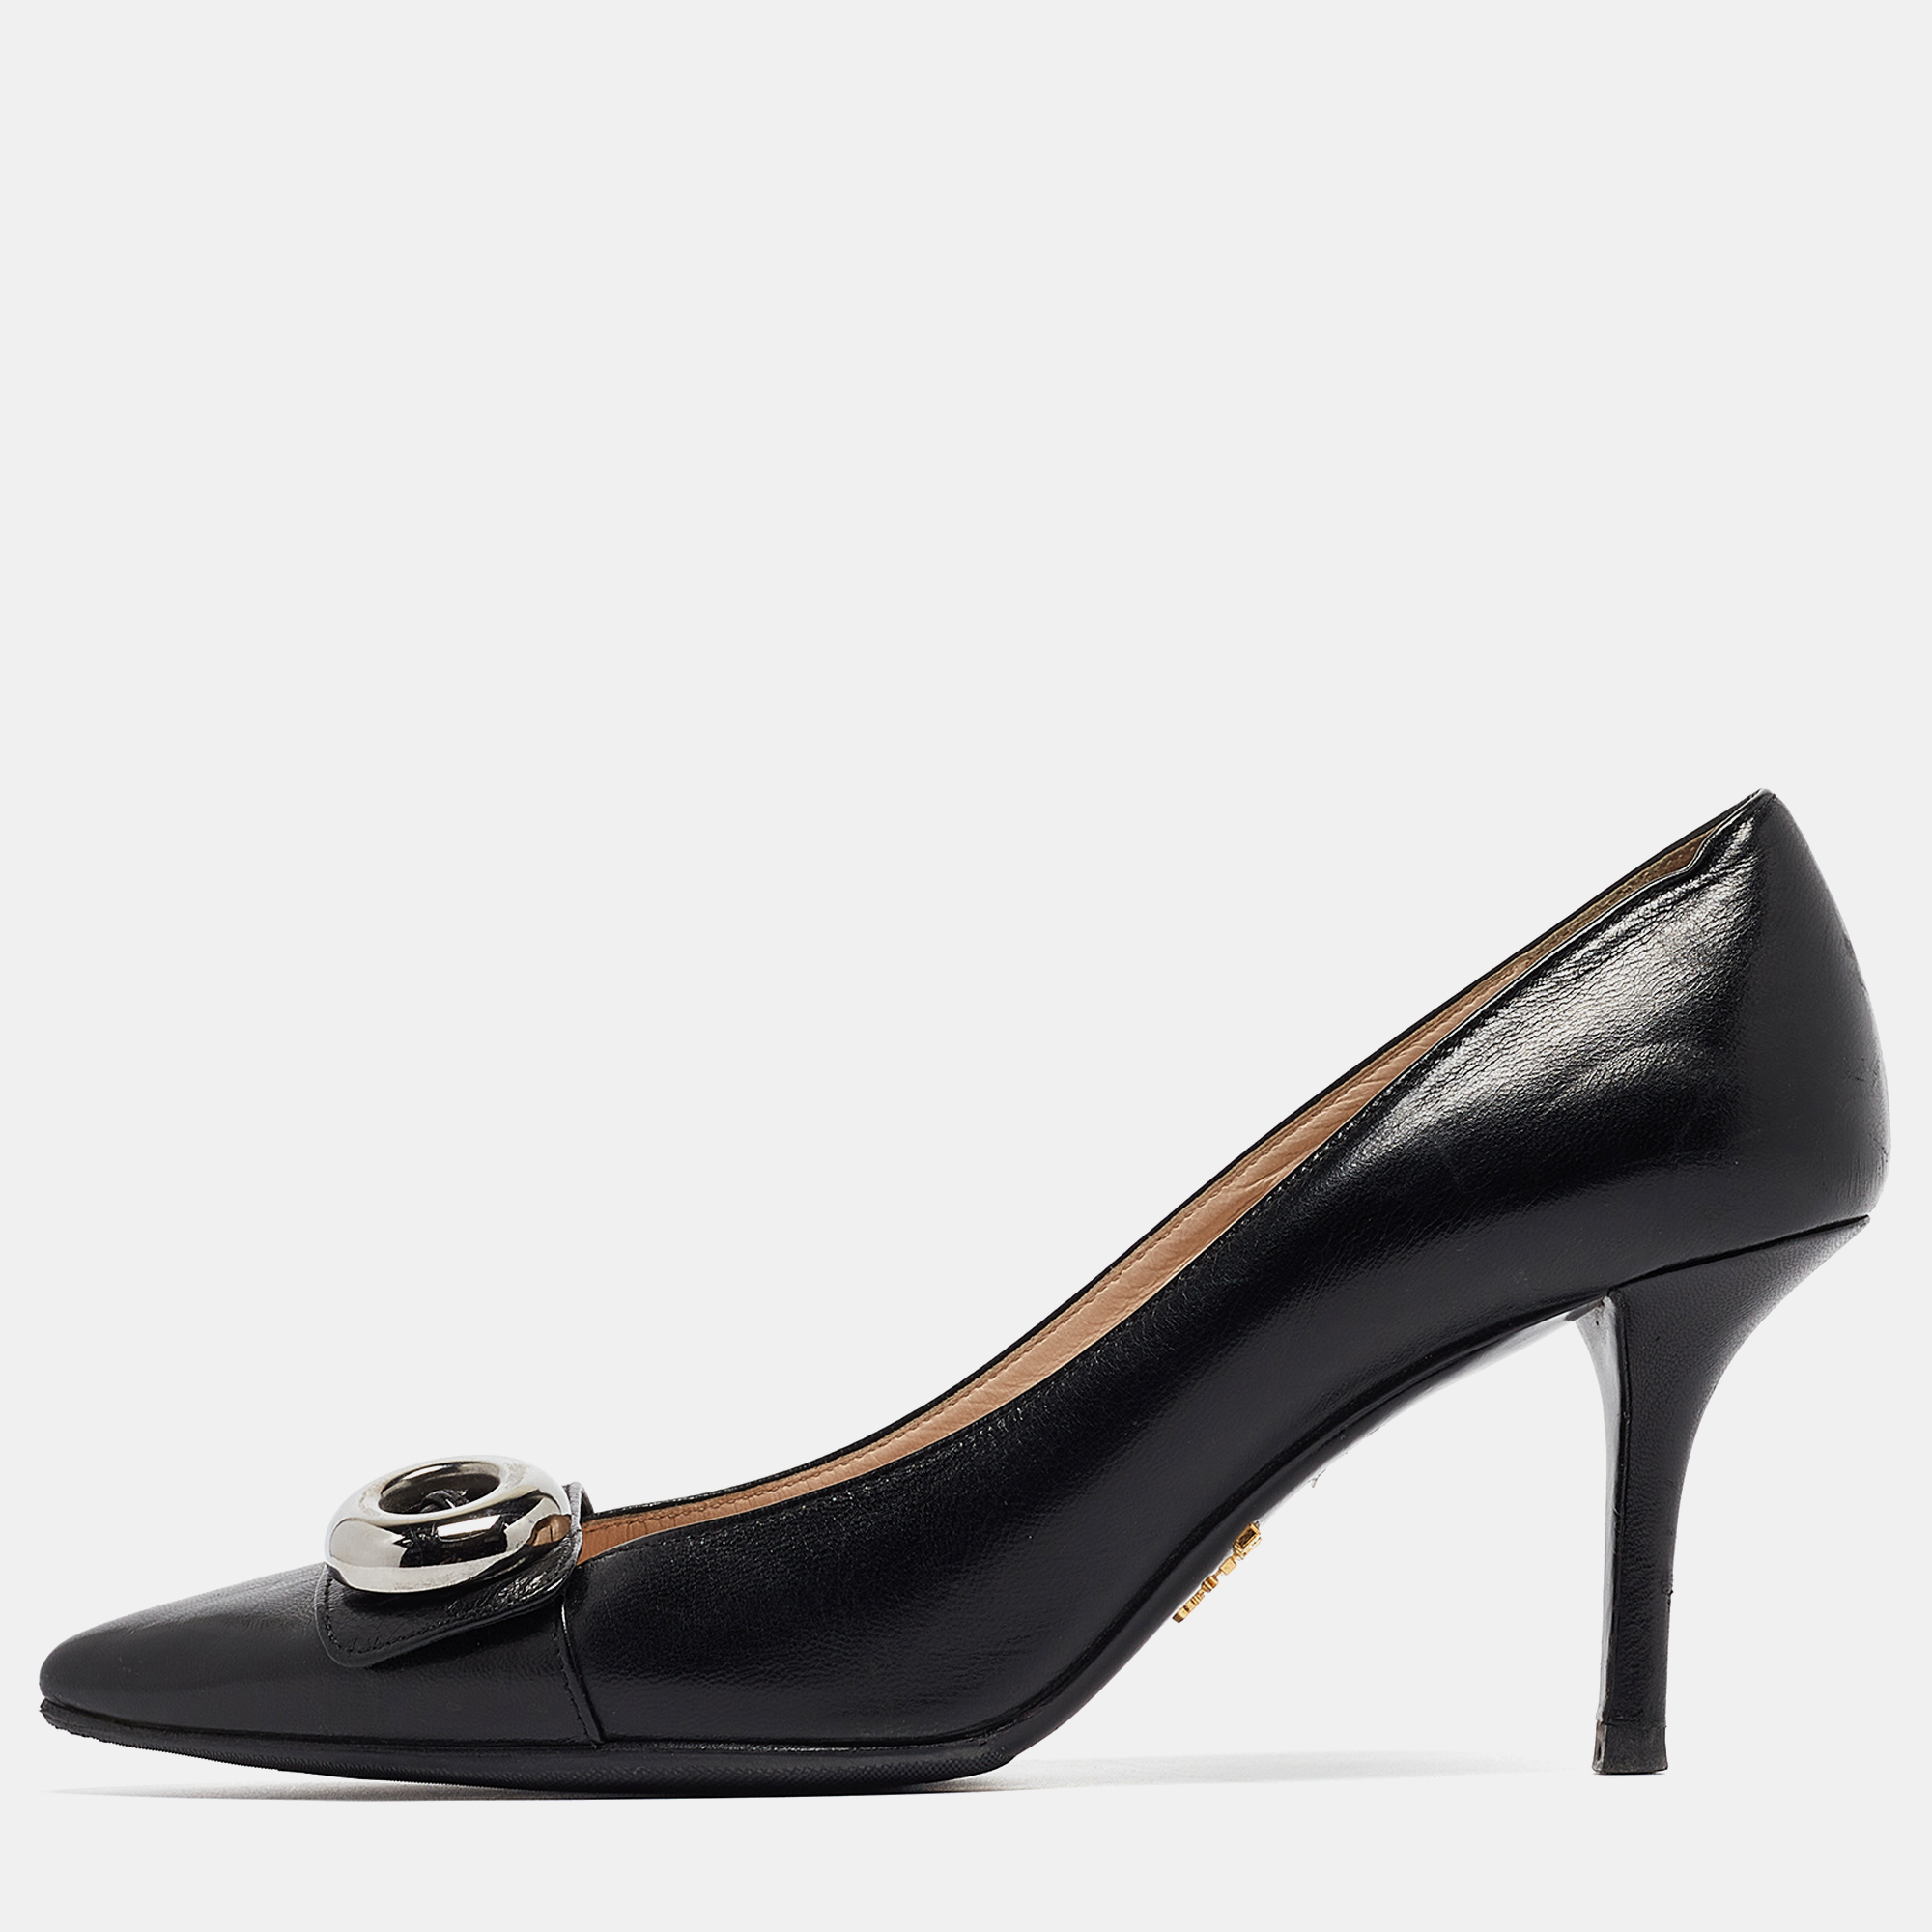 Pre-owned Prada Black Leather Pointed Toe Pumps Size 37.5